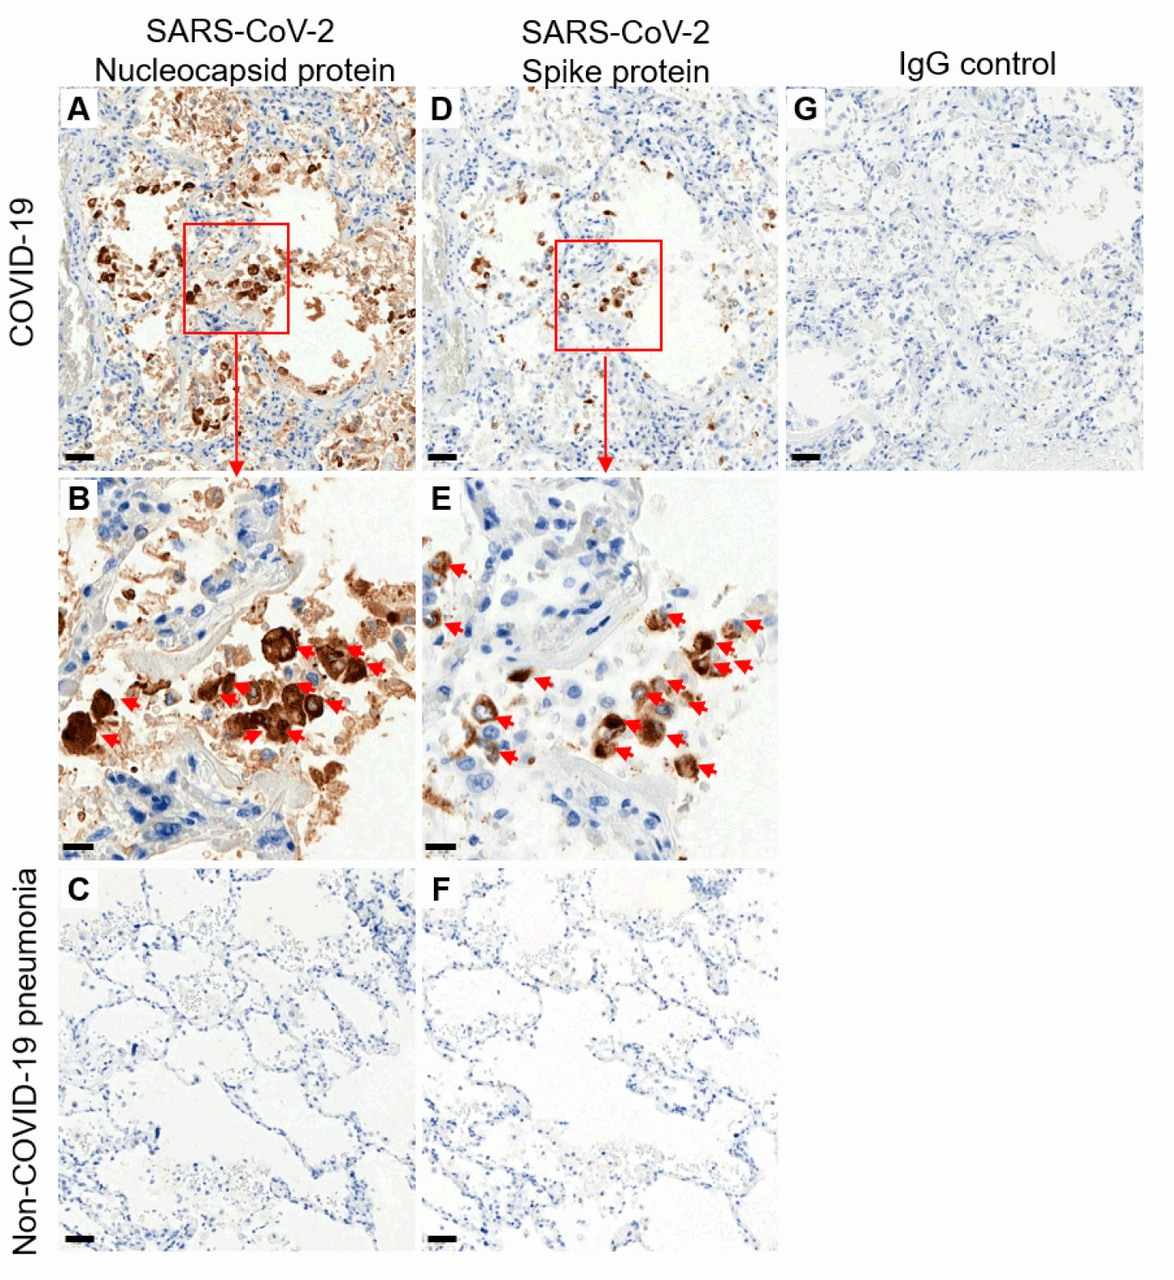 Figure 1 Immunohistochemistry Validation of SARS-CoV-2 (COVID-19) Nucleocapsid in Human Lung Tissue from the COVID-19 Patient (Sun et al., 2020)  
Detection of SARS-CoV-2 nucleocapsid protein by anti-SARS-COV-2 nucleocapsid antibodies (9099, 0.02 &#956;g/mL, A, B) or SARS-CoV-2 Spike S1 antibodies (9083, 1 &#956;g/mL D, E) in adjacent sections of autopsy lung tissue from COVID-19 deceased patient. Negative control staining on autopsy lung tissue from patient who died from non-COVID-19 pneumonia is shown for Nucleocapsid protein (C) or Spike protein (F) . Negative control using normal rabbit immunoglobulin on COVID-19 autopsy tissue is presented (G) . DAB chromogen and hematoxylin counterstain are used. Scale bars: 50μM in A, C, D, F, G; 20&#956;M in B and E.